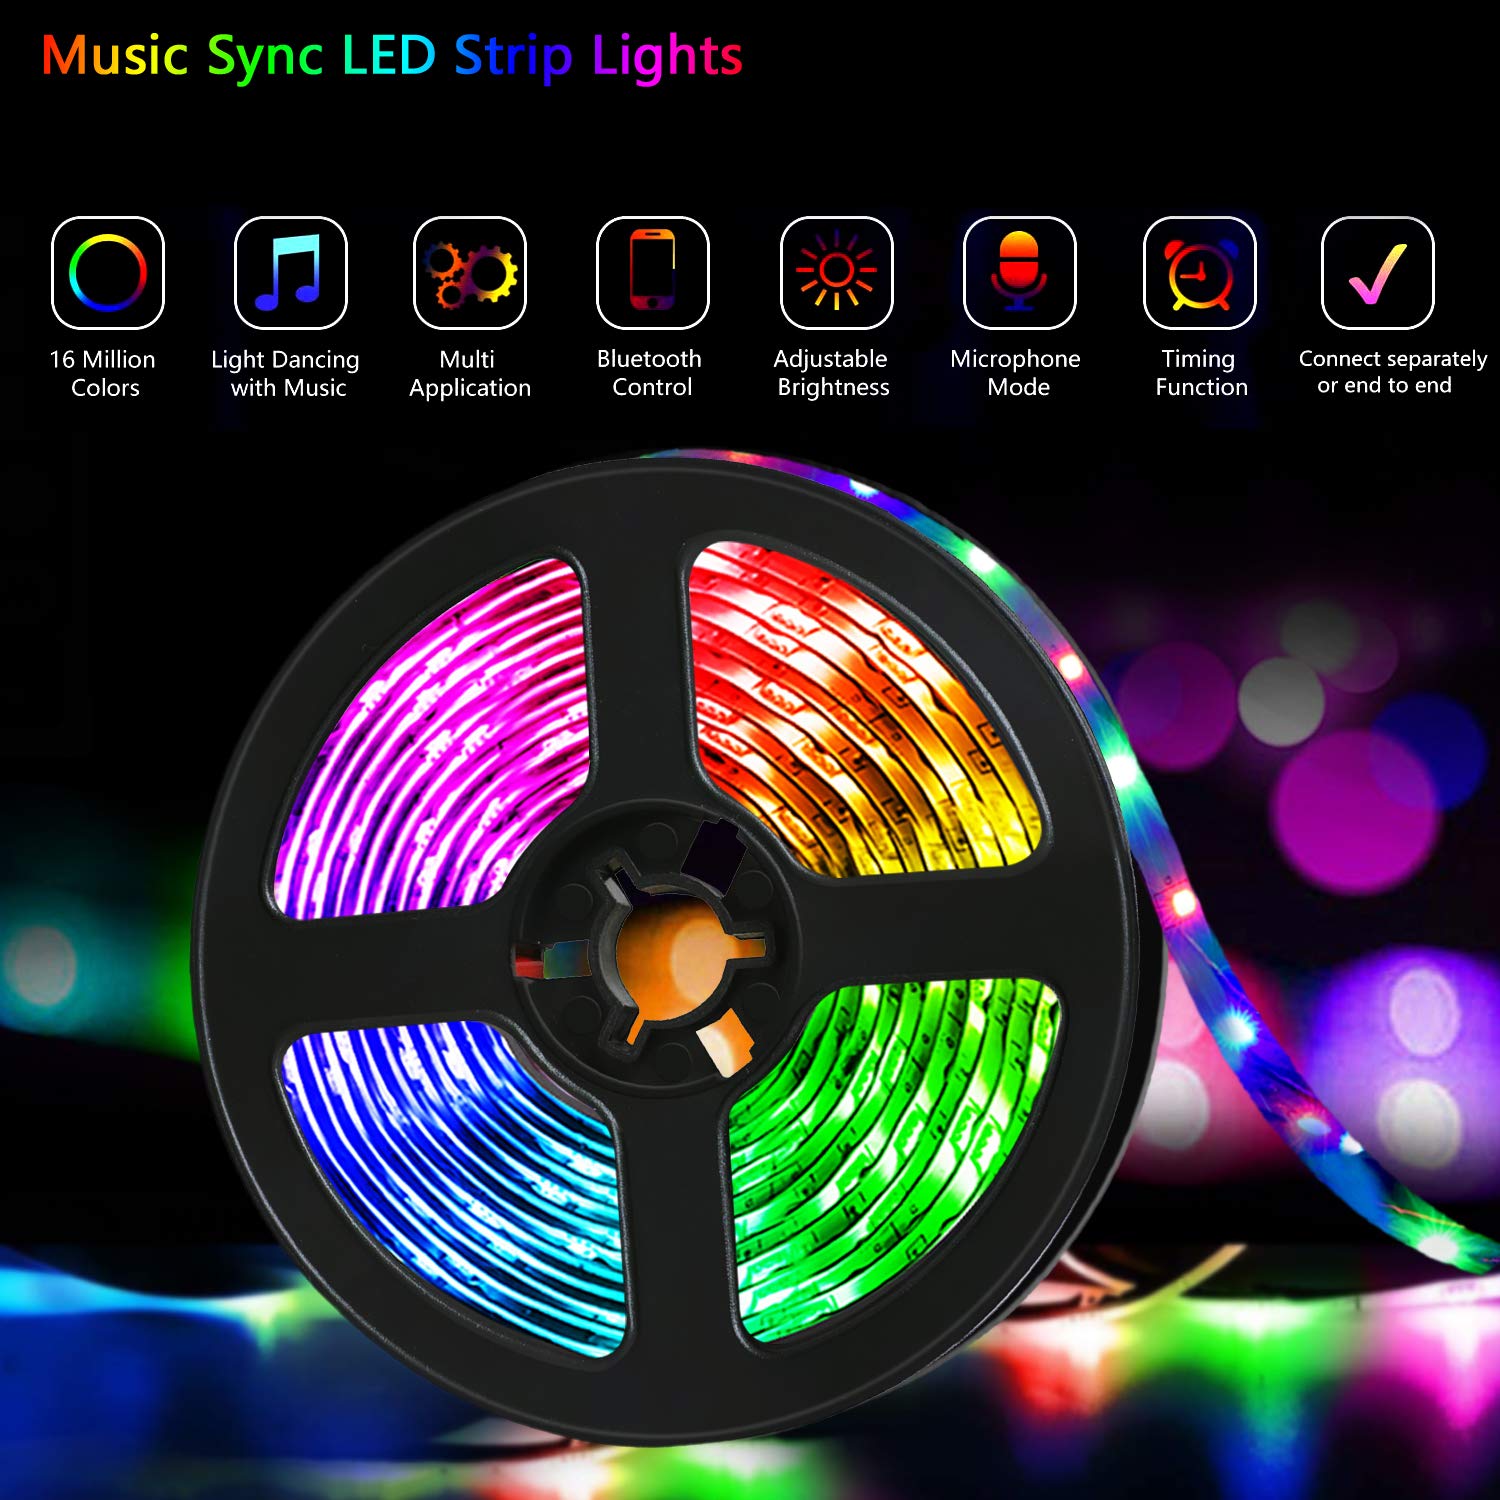 QZYL Led Lights for Bedroom,49.2 Feet Led Strip Lights,Music Sync Color Changing Flexible Rope Lights with Remote App Control Luces Led Strips Lights for Party Home Decoration